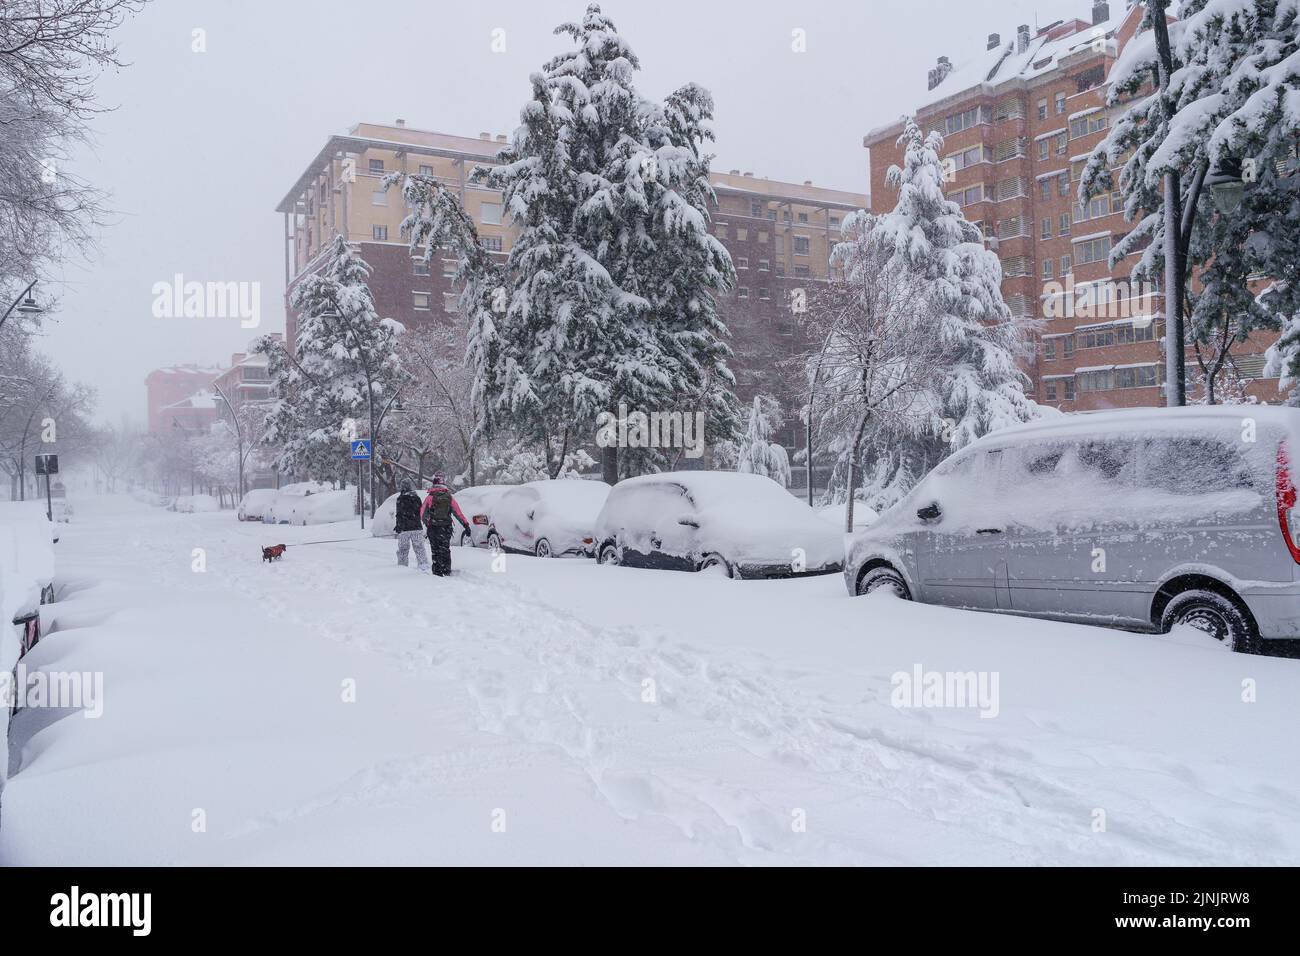 Streets and buildings covered in snow by day due to snowstorm Filomena falling in Madrid Spain. People walking in the snow. spain Stock Photo